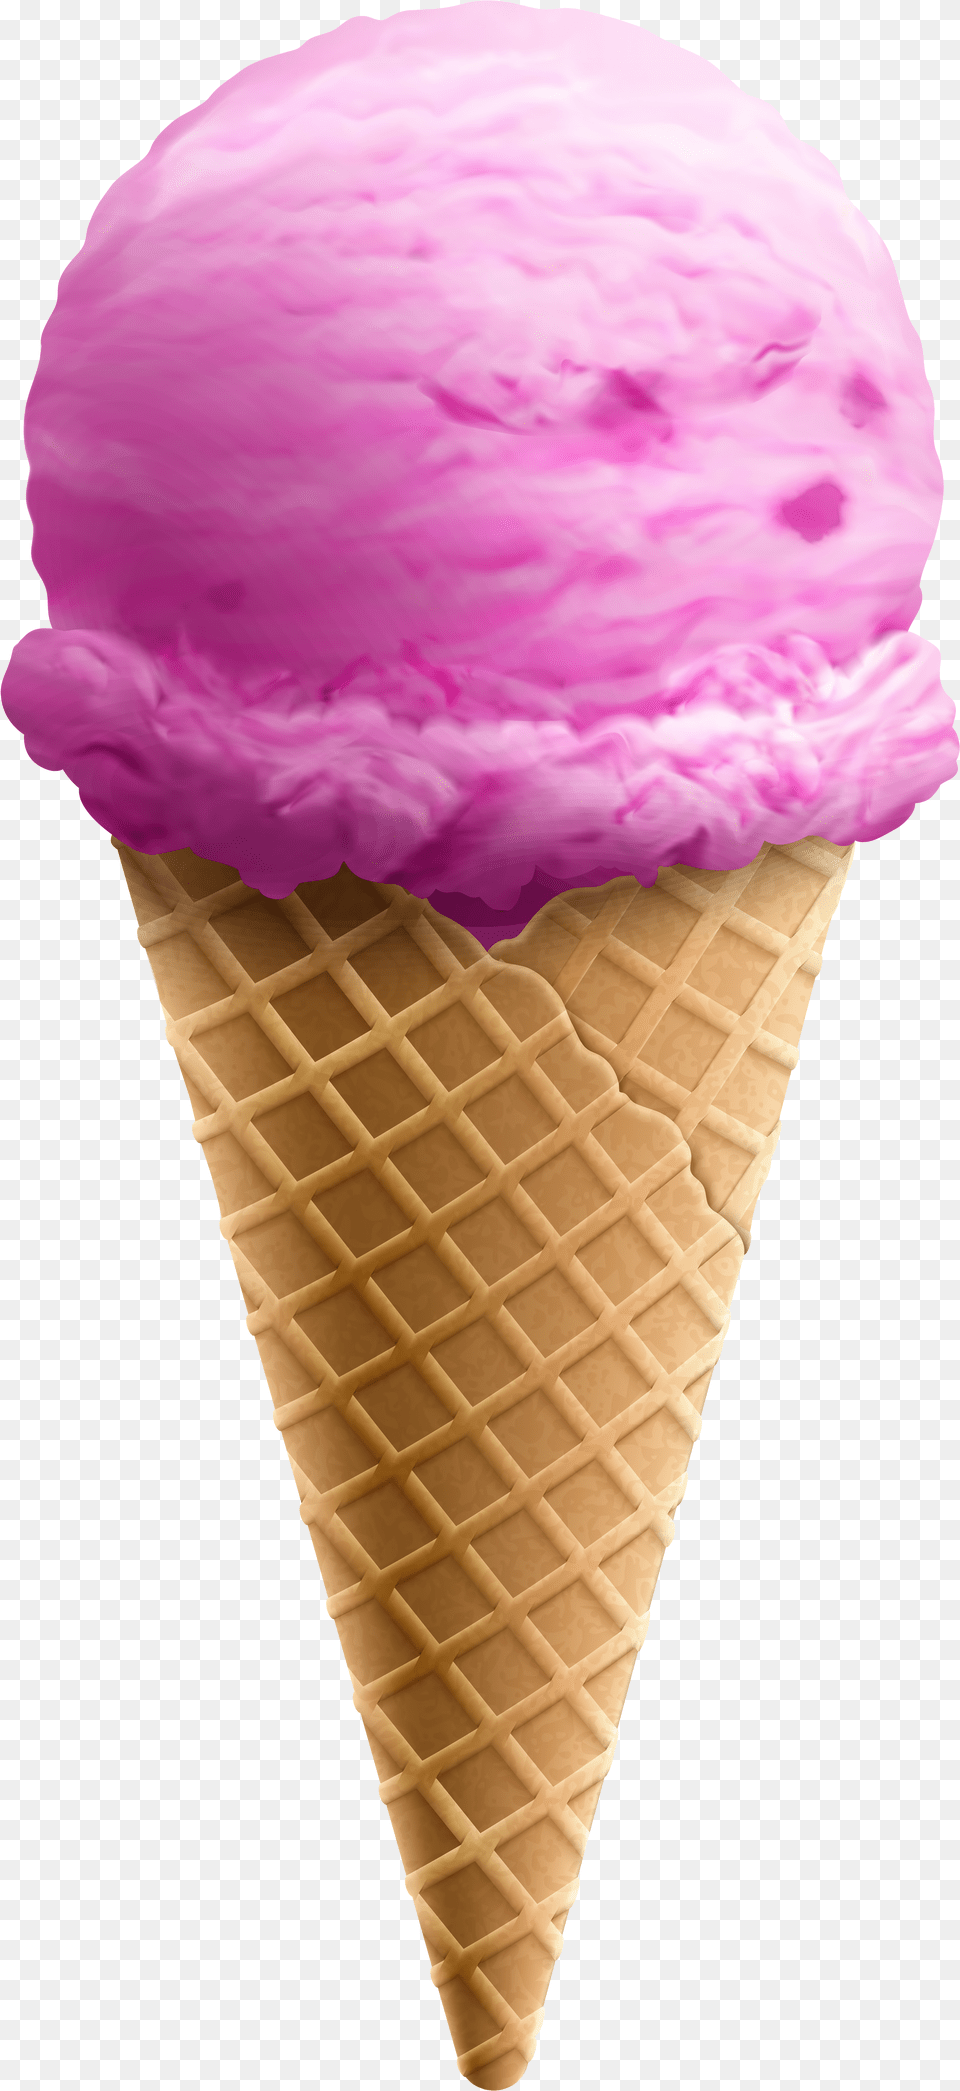 Ice Cone Cone Free Transparent Png